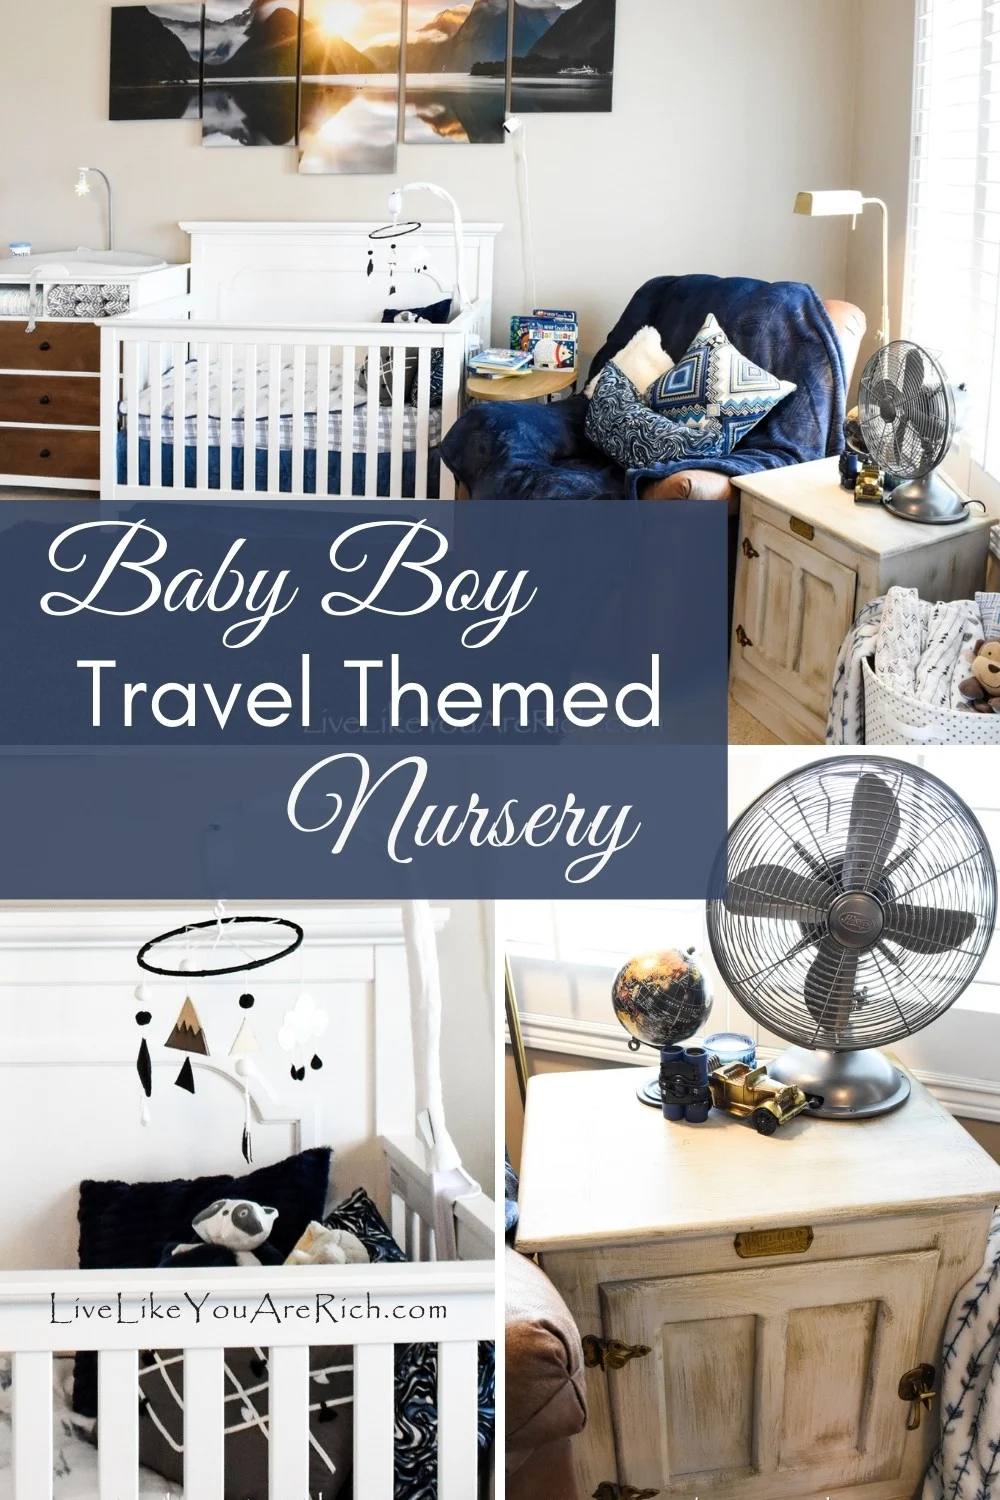 This travel themed boy nursery post give you ideas on how to make a functional, cute, and inexpensive travel themed nursery for your little one.